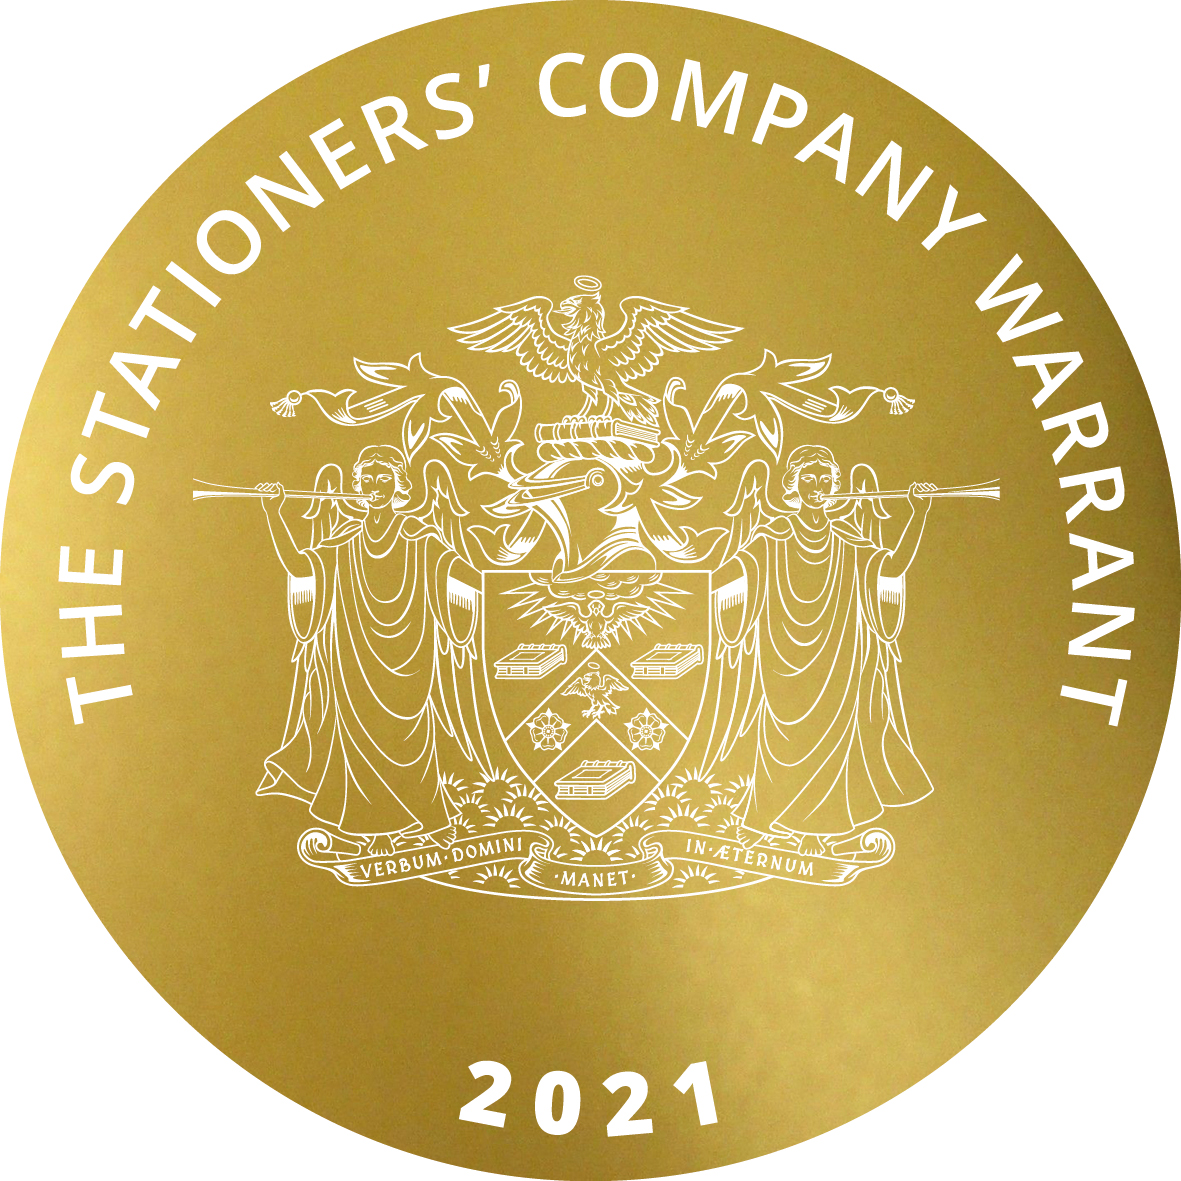 Stationers 2021 Warrant Crest